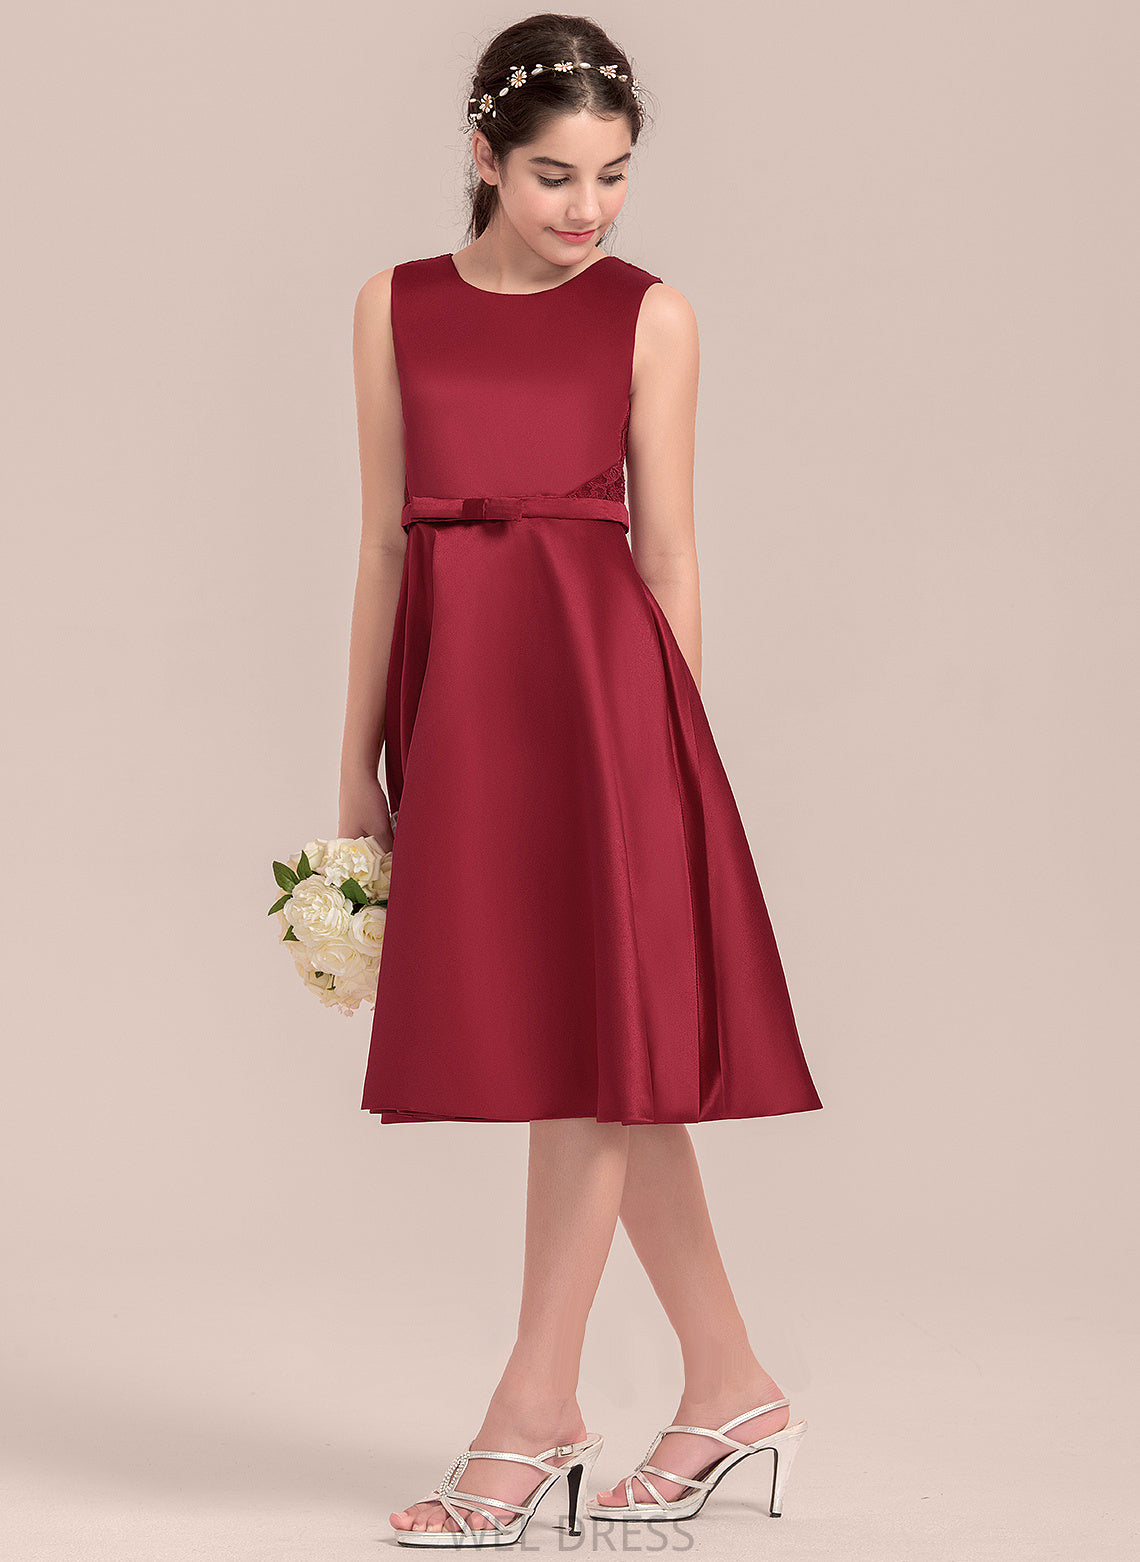 Junior Bridesmaid Dresses Scoop A-Line Knee-Length Bow(s) Neck Patience With Lace Satin